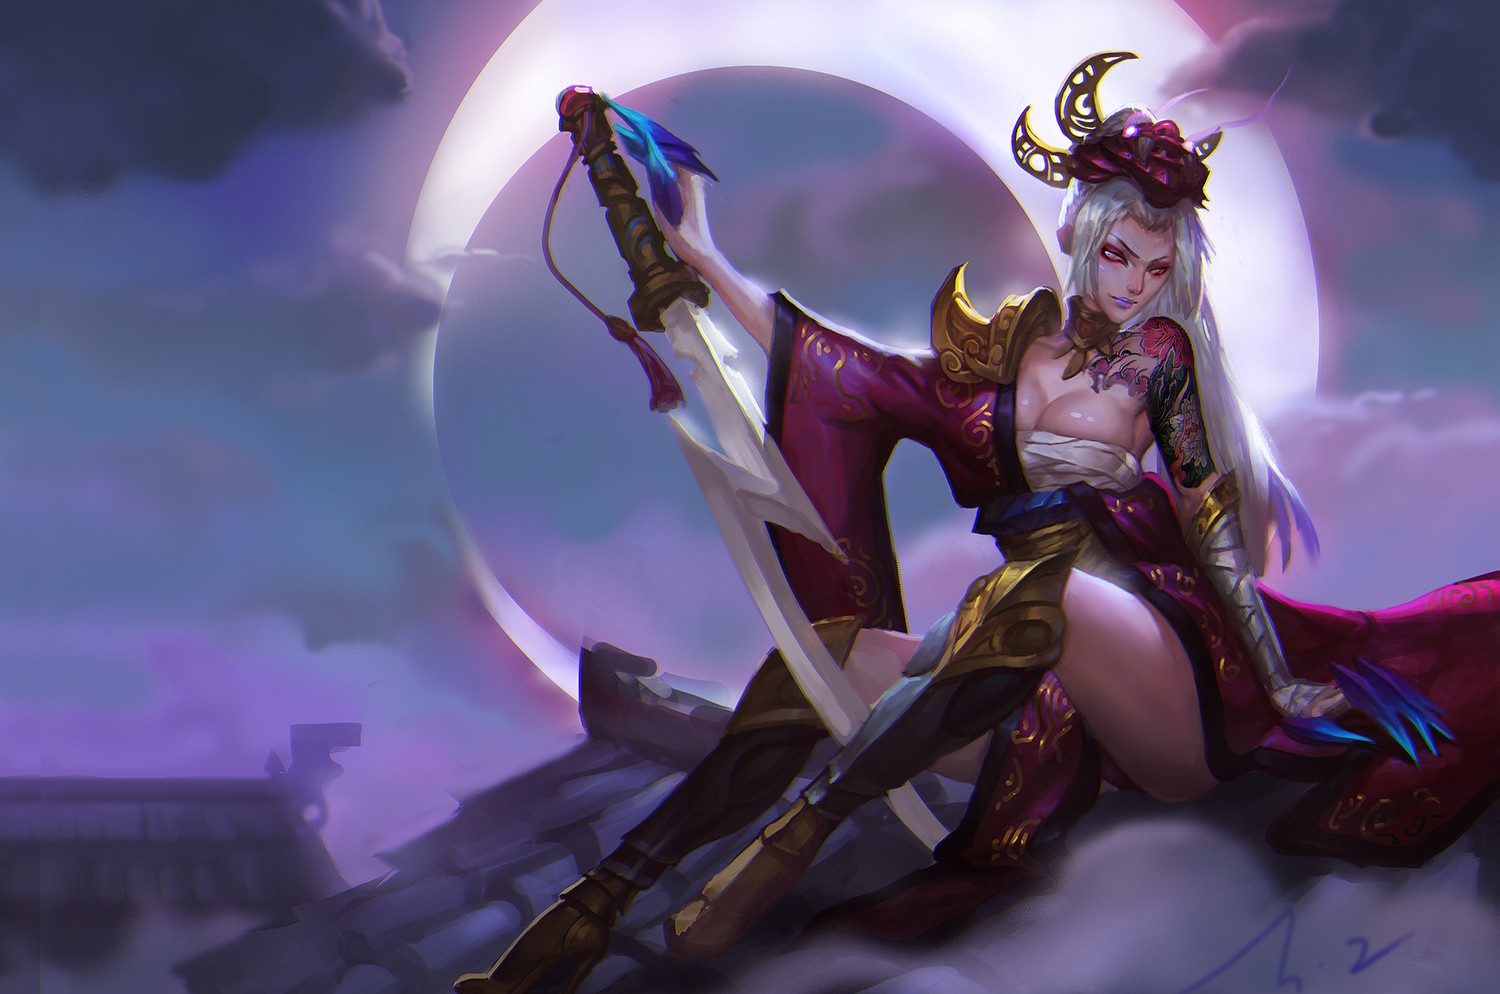 General 1500x994 big boobs League of Legends PC gaming women with swords rooftops legs white hair sitting video game art video game girls fantasy art fantasy girl Diana (League of Legends)